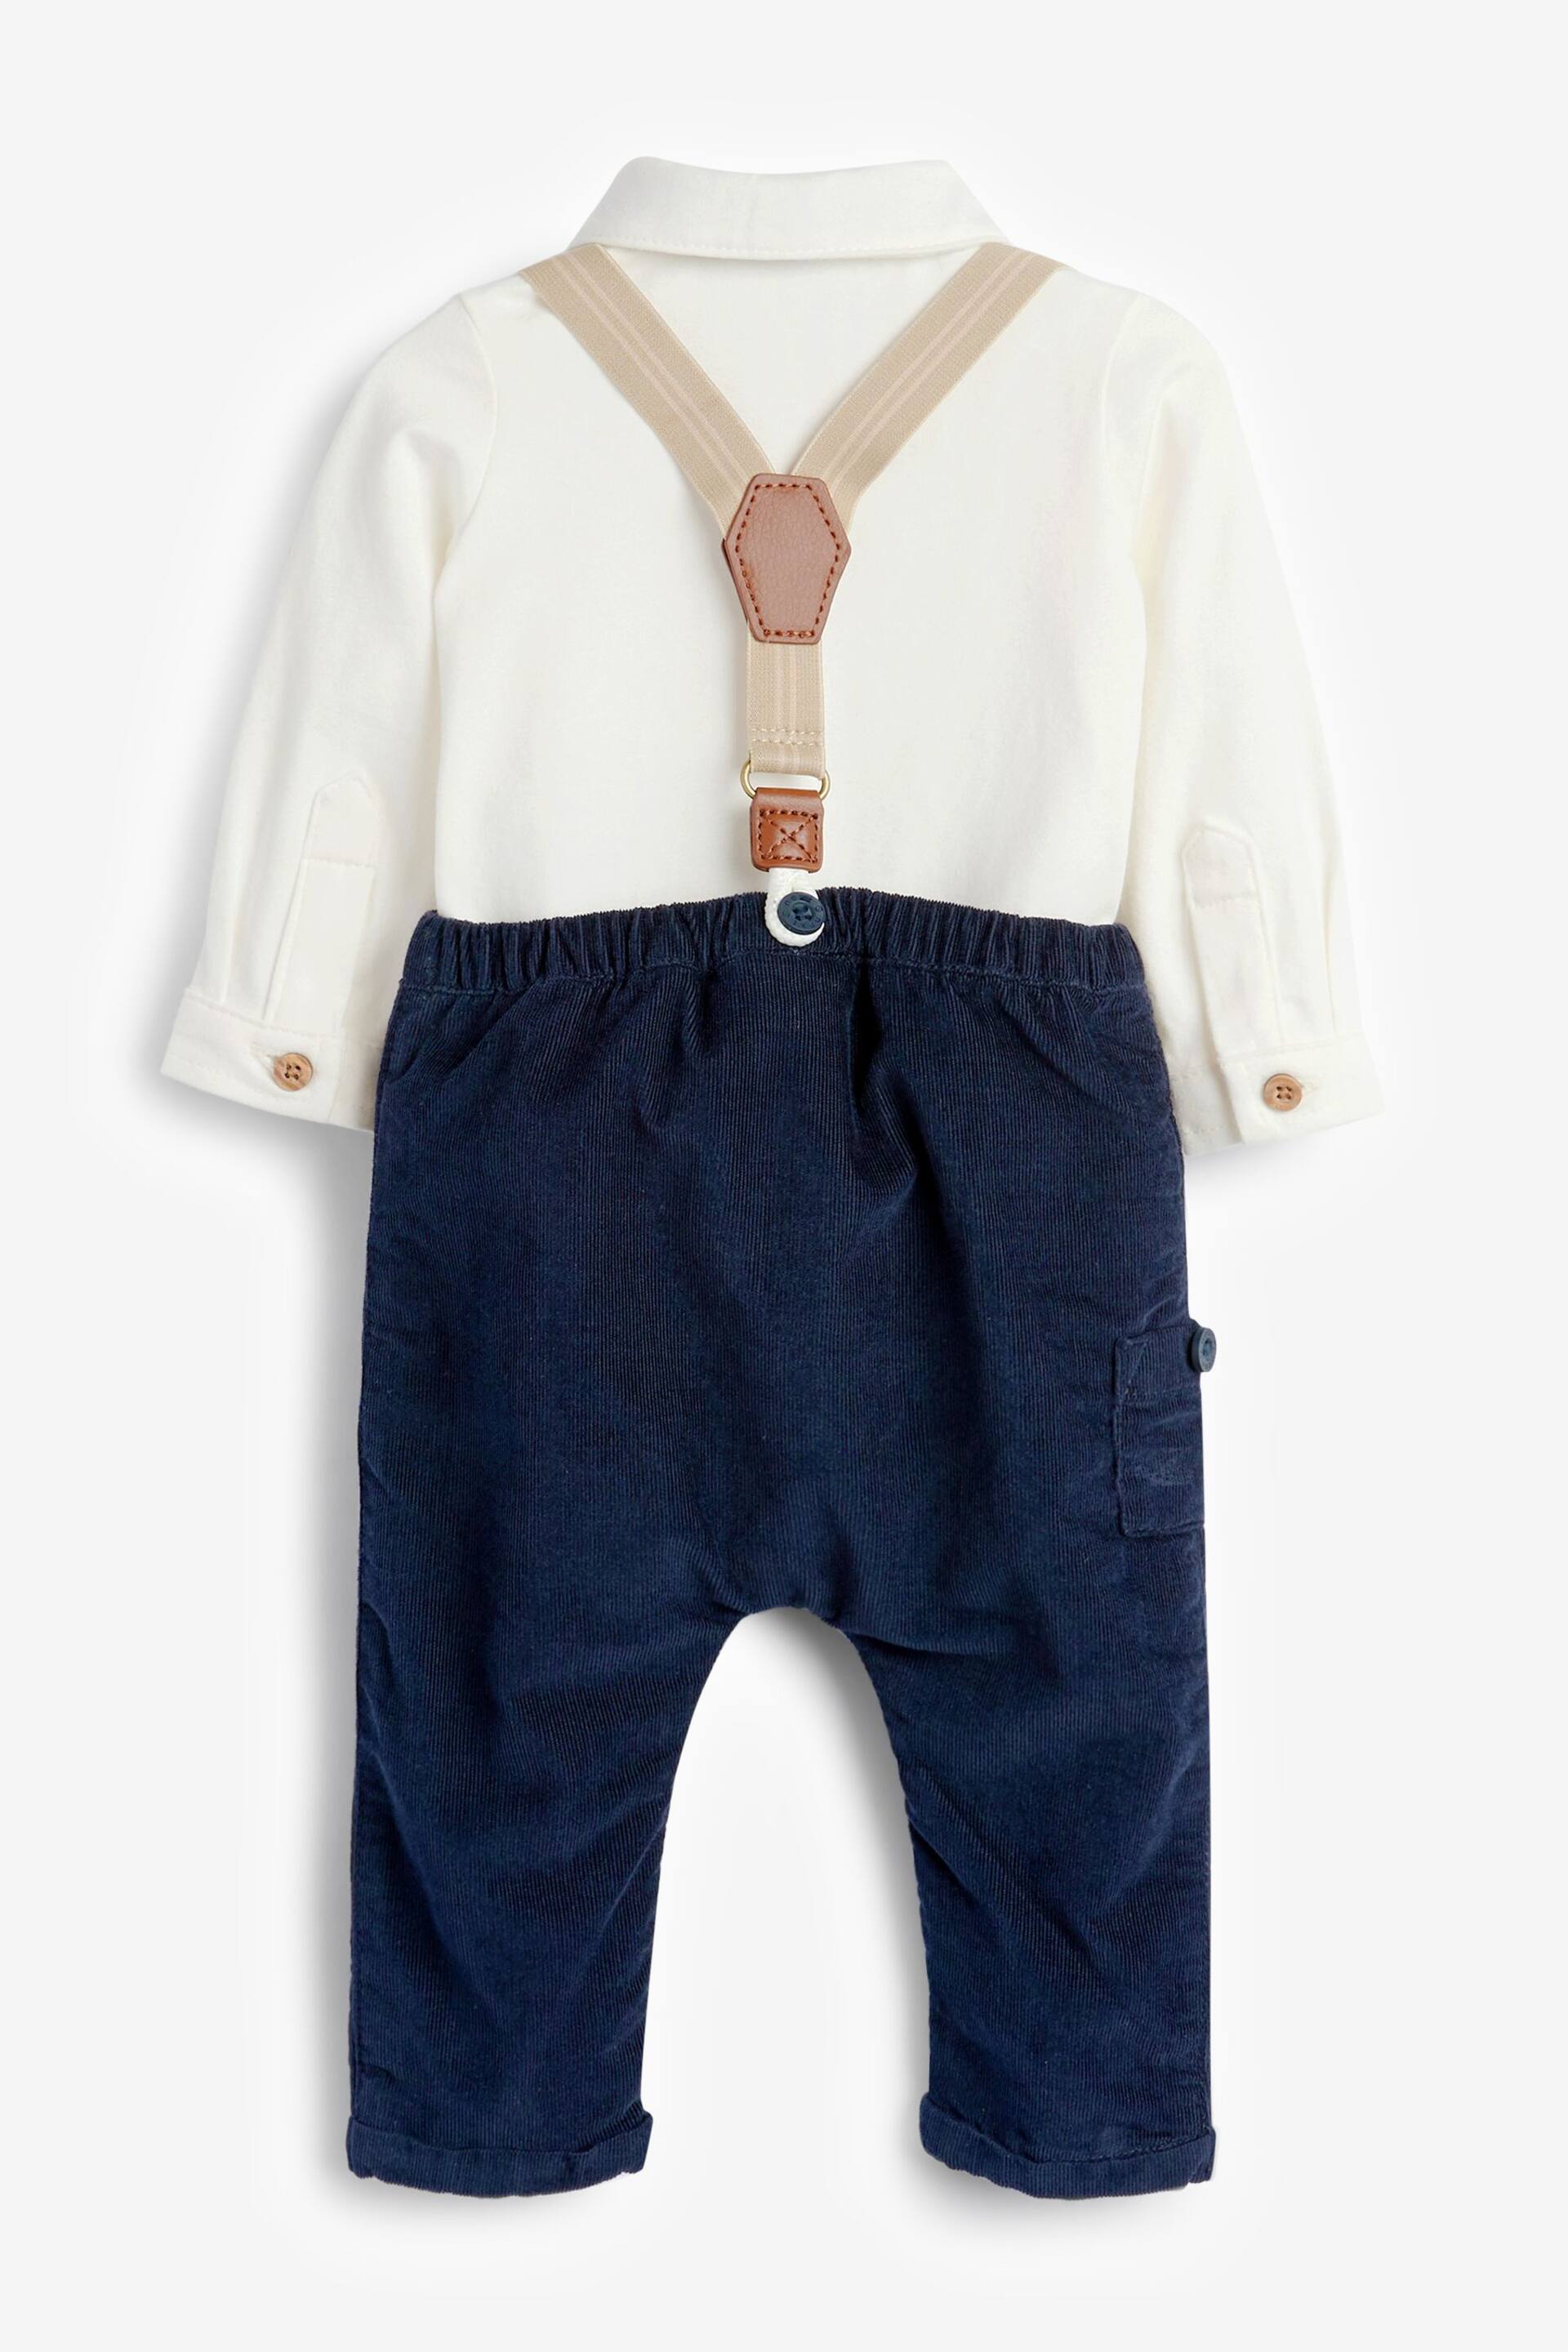 Navy/White 4 Piece Shirt Body, Trousers and Braces Set (0mths-2yrs) - Image 2 of 7